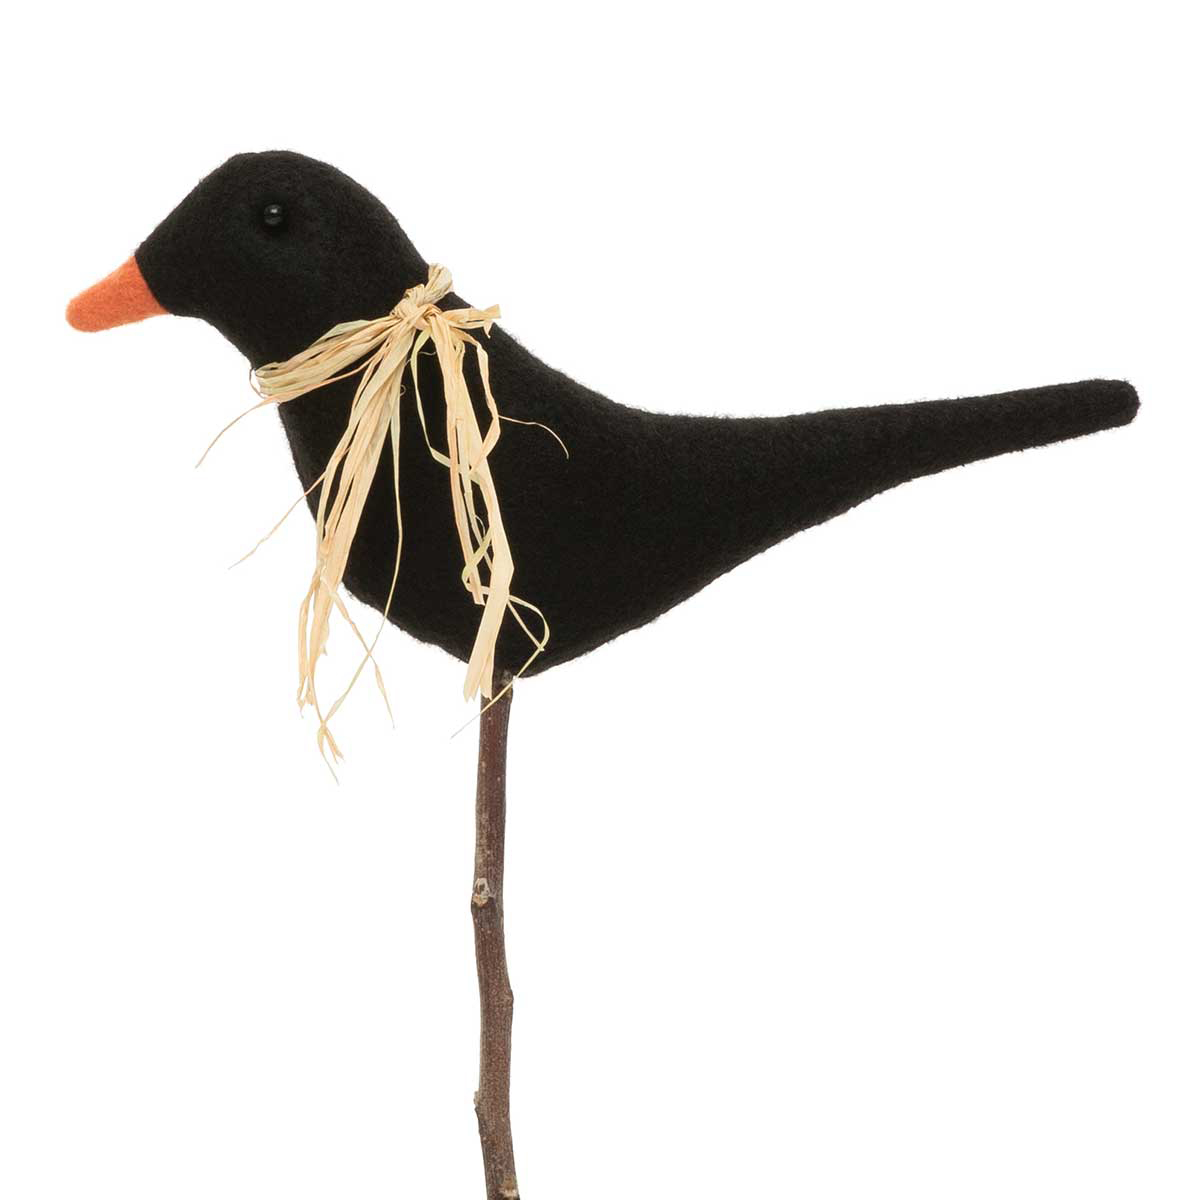 PLUSH CROW ORNAMENT ON STICK 8.5IN X 4IN (9IN WITH STICK)